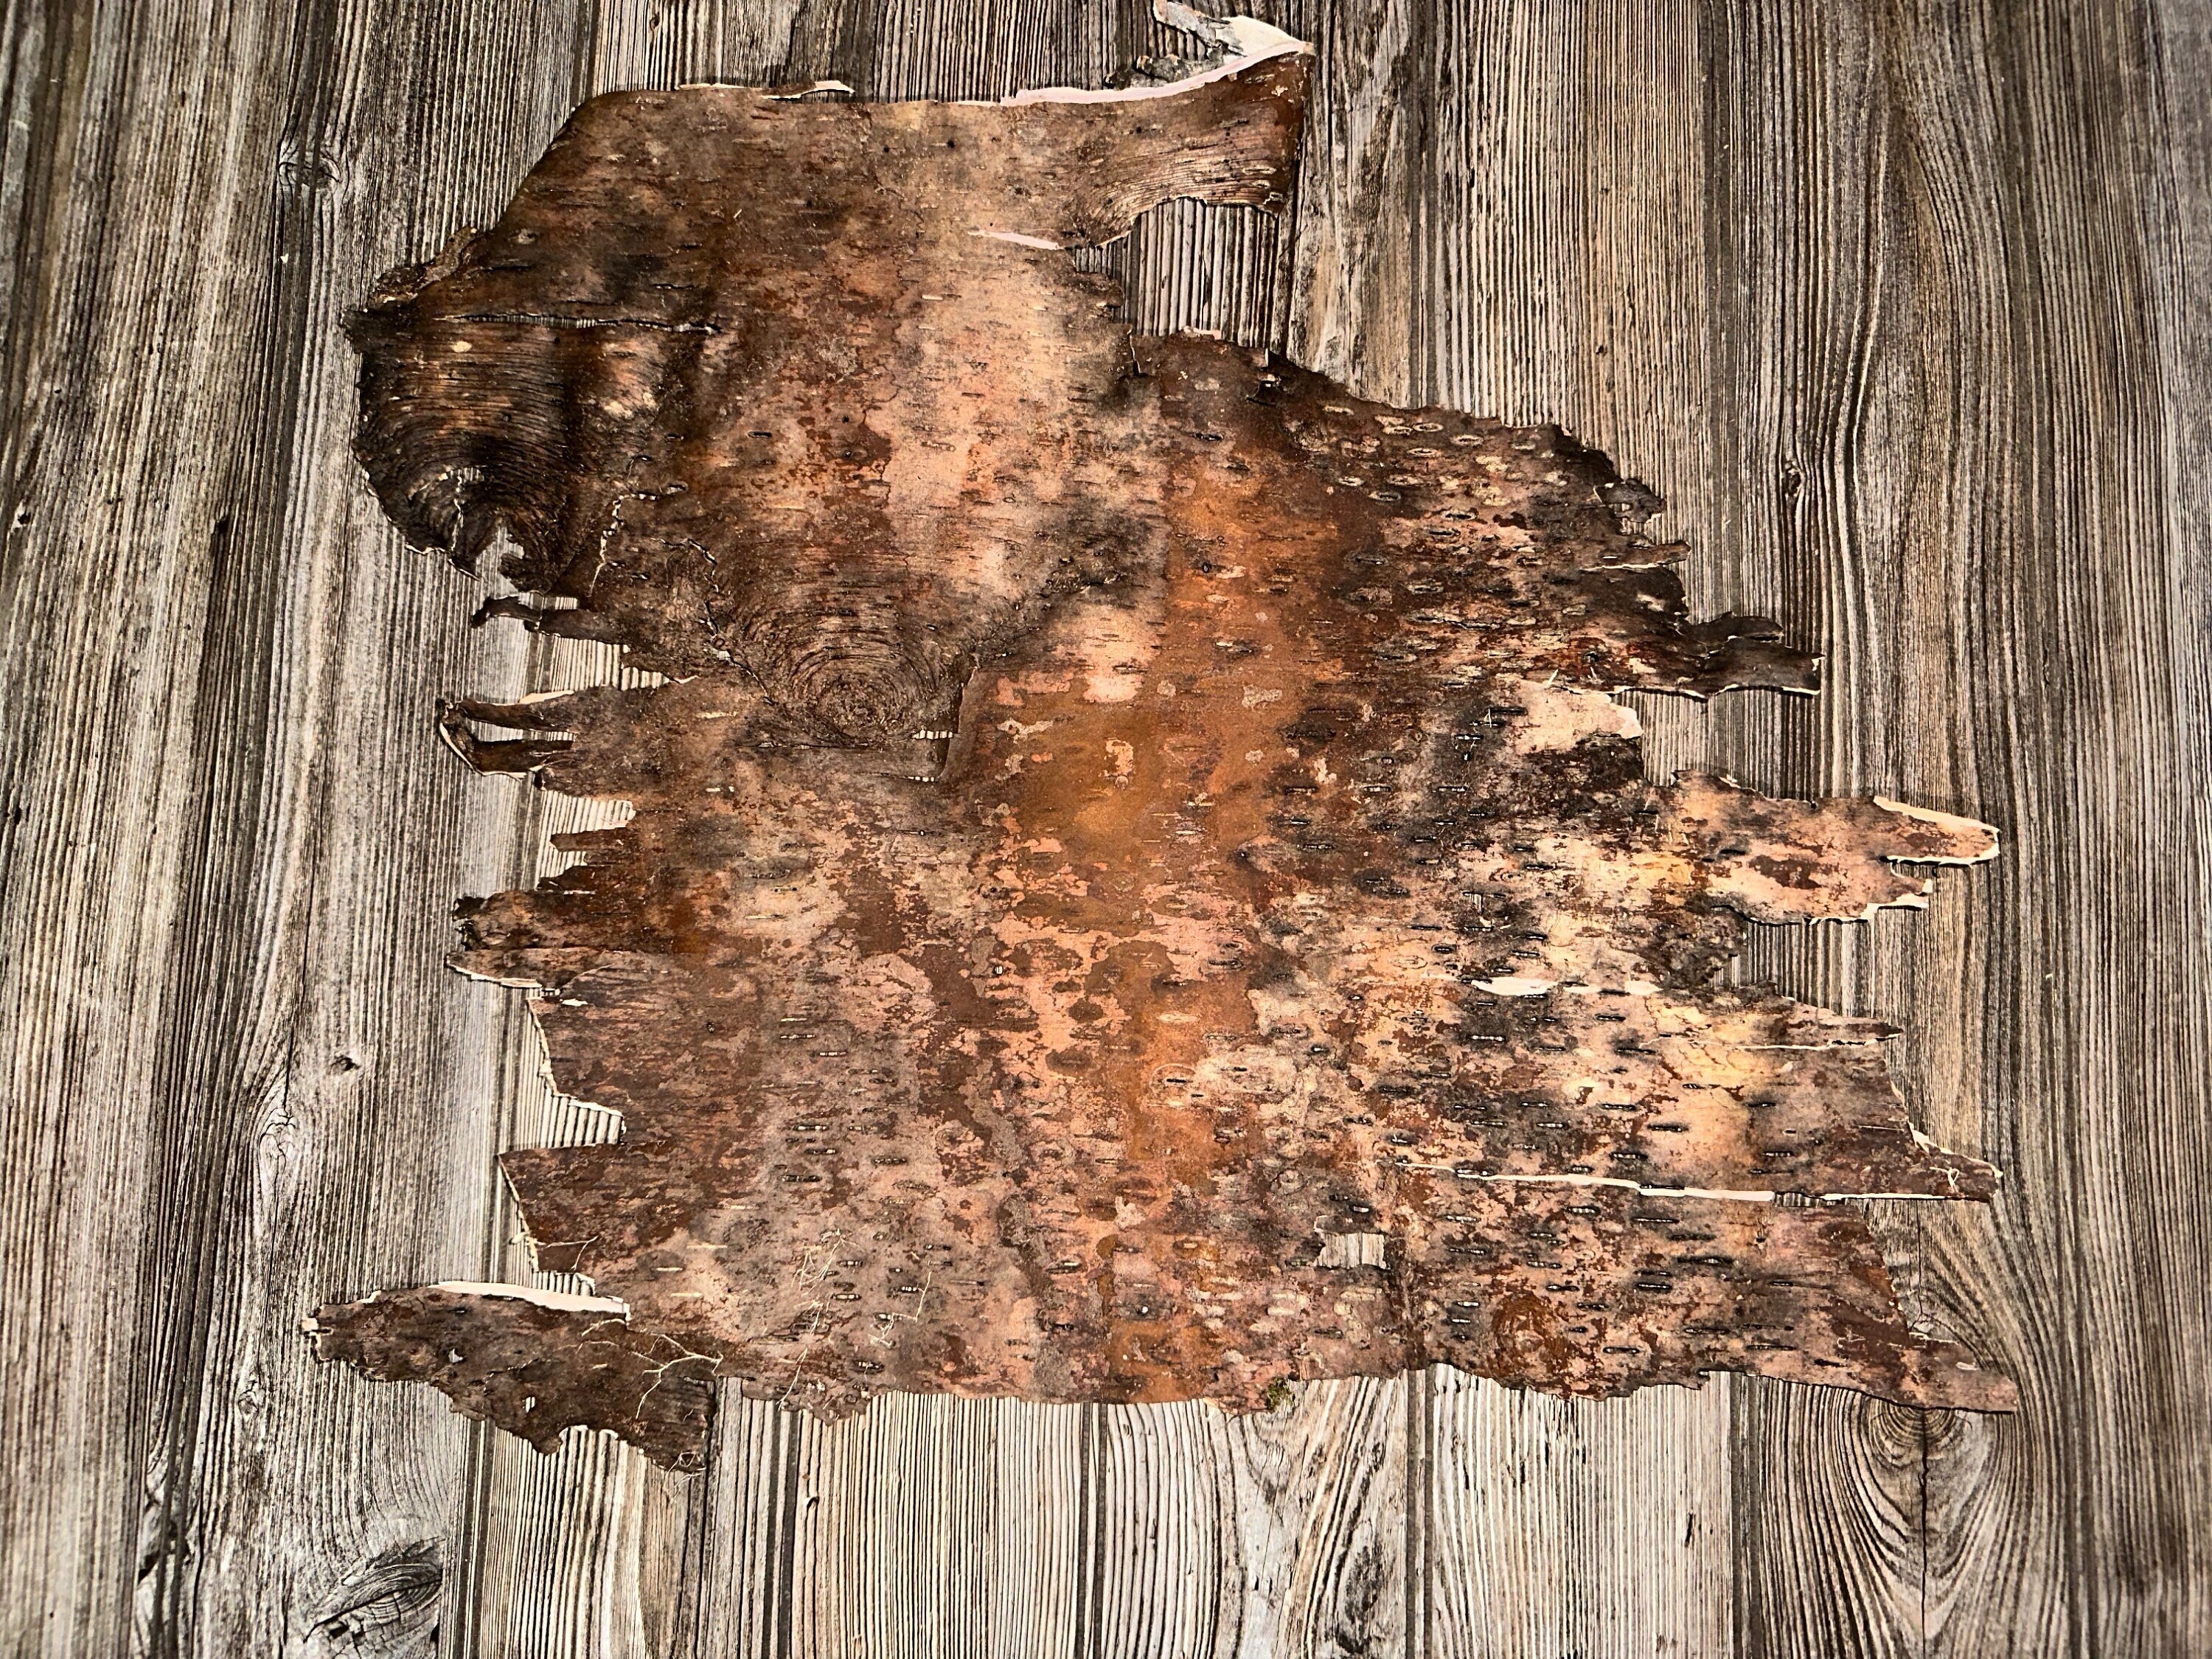 White Birch Bark, Paper Birch, Approximately 21 Inches Long by 18 Inches Wide